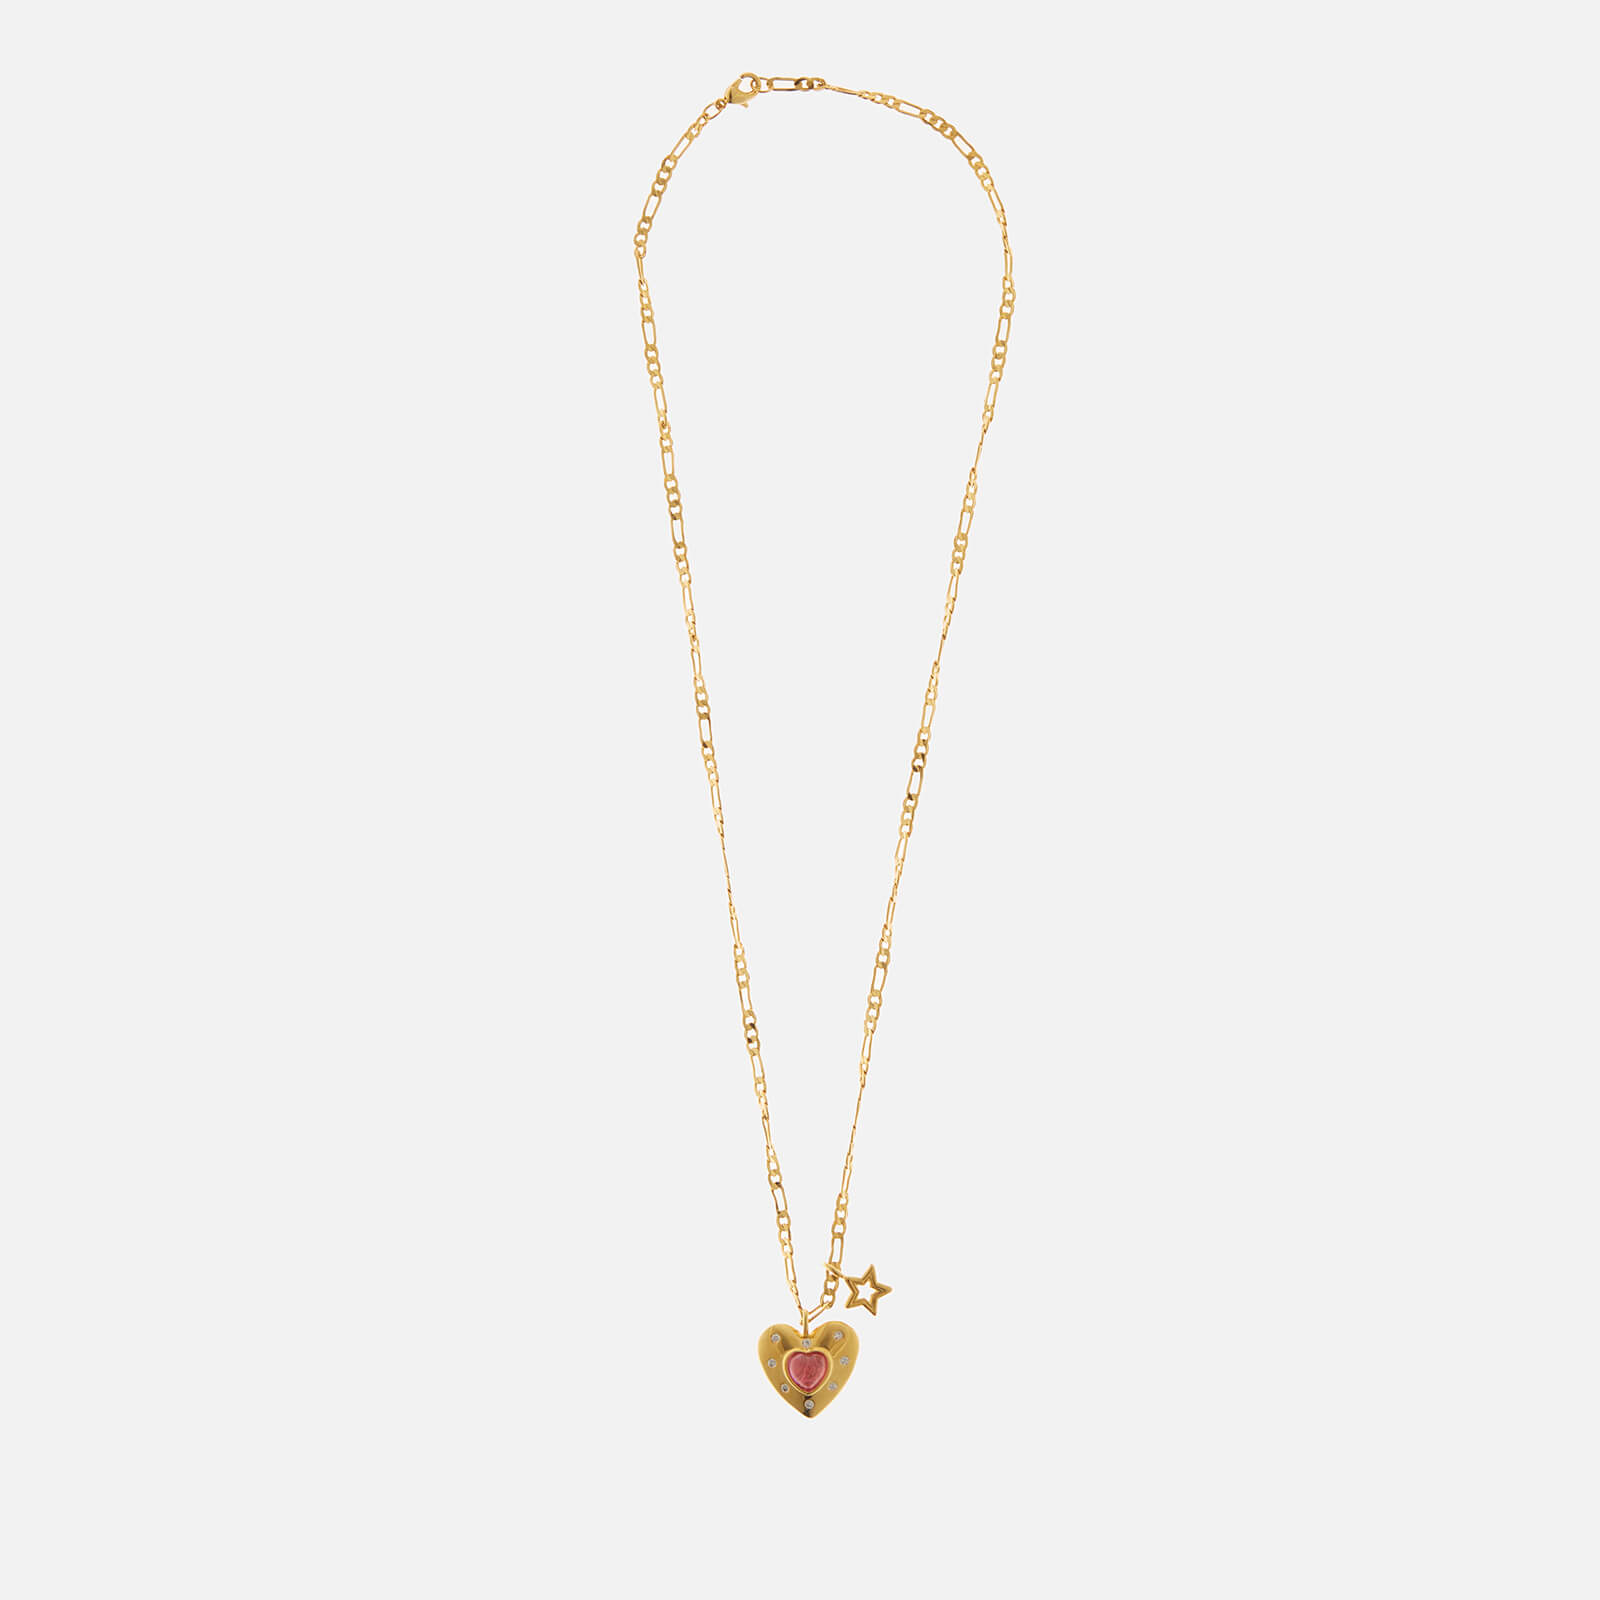 July Child Women's Cosmic Love Necklace - Gold